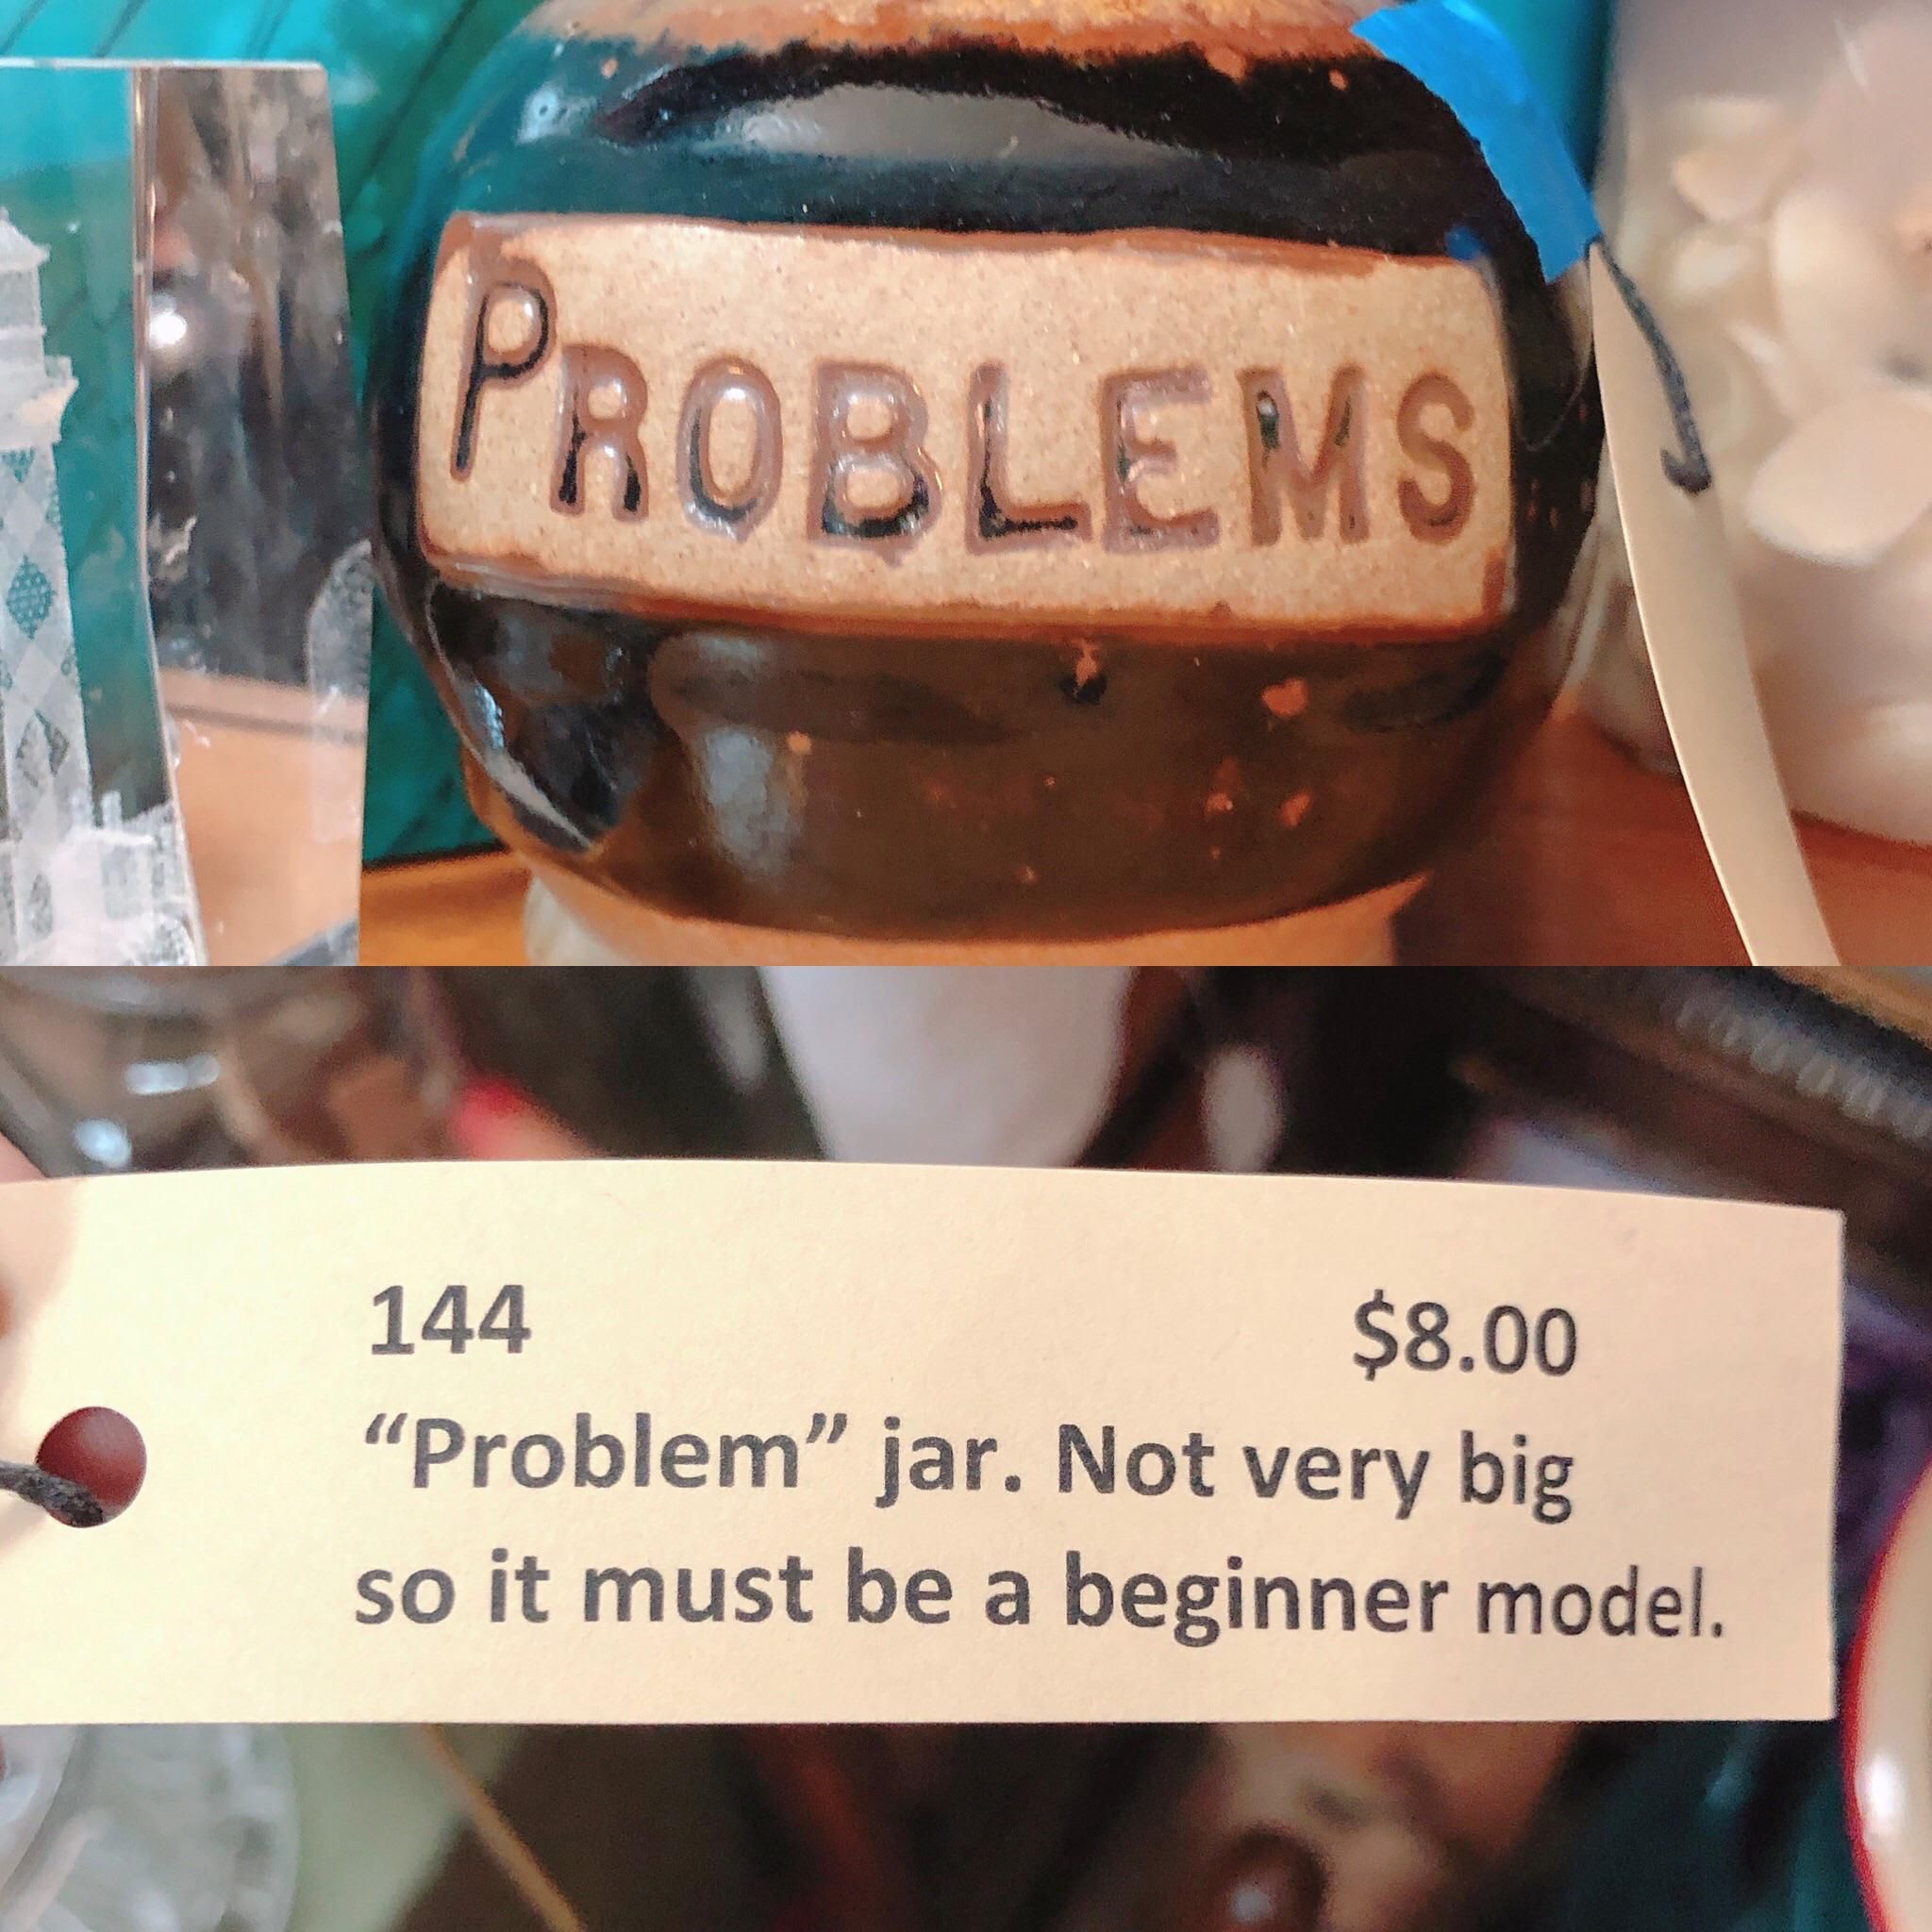 Found this “Problem” jar at an antique mall and saw this on its price tag